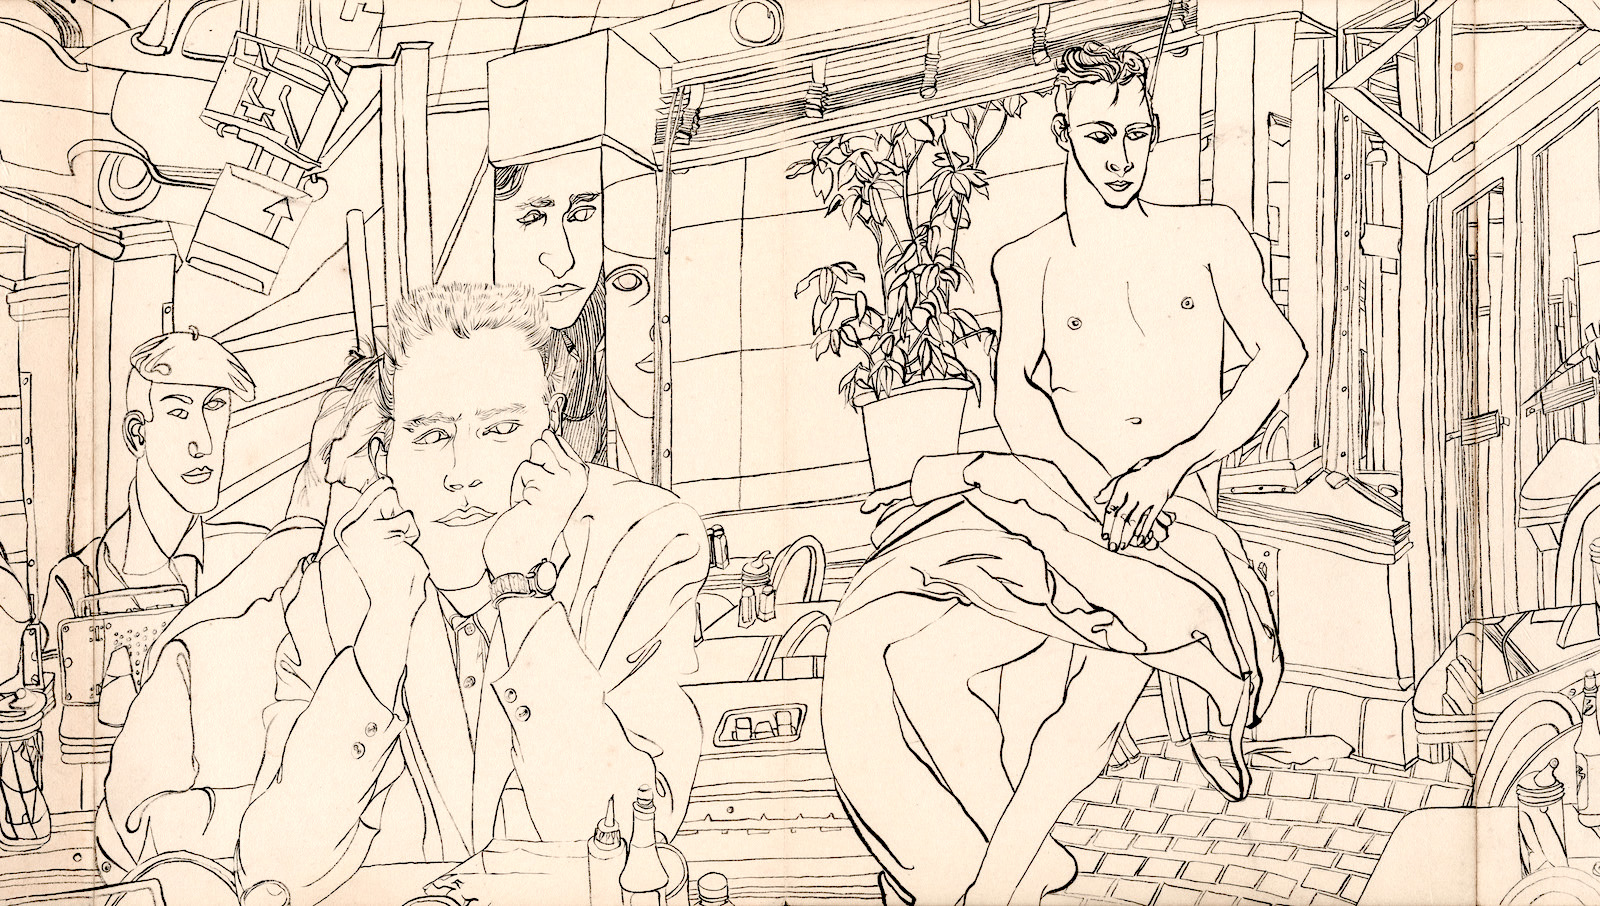 Forbidden Amateur Nudists Art - Read These Drawings Like a Book - The Gay & Lesbian Review